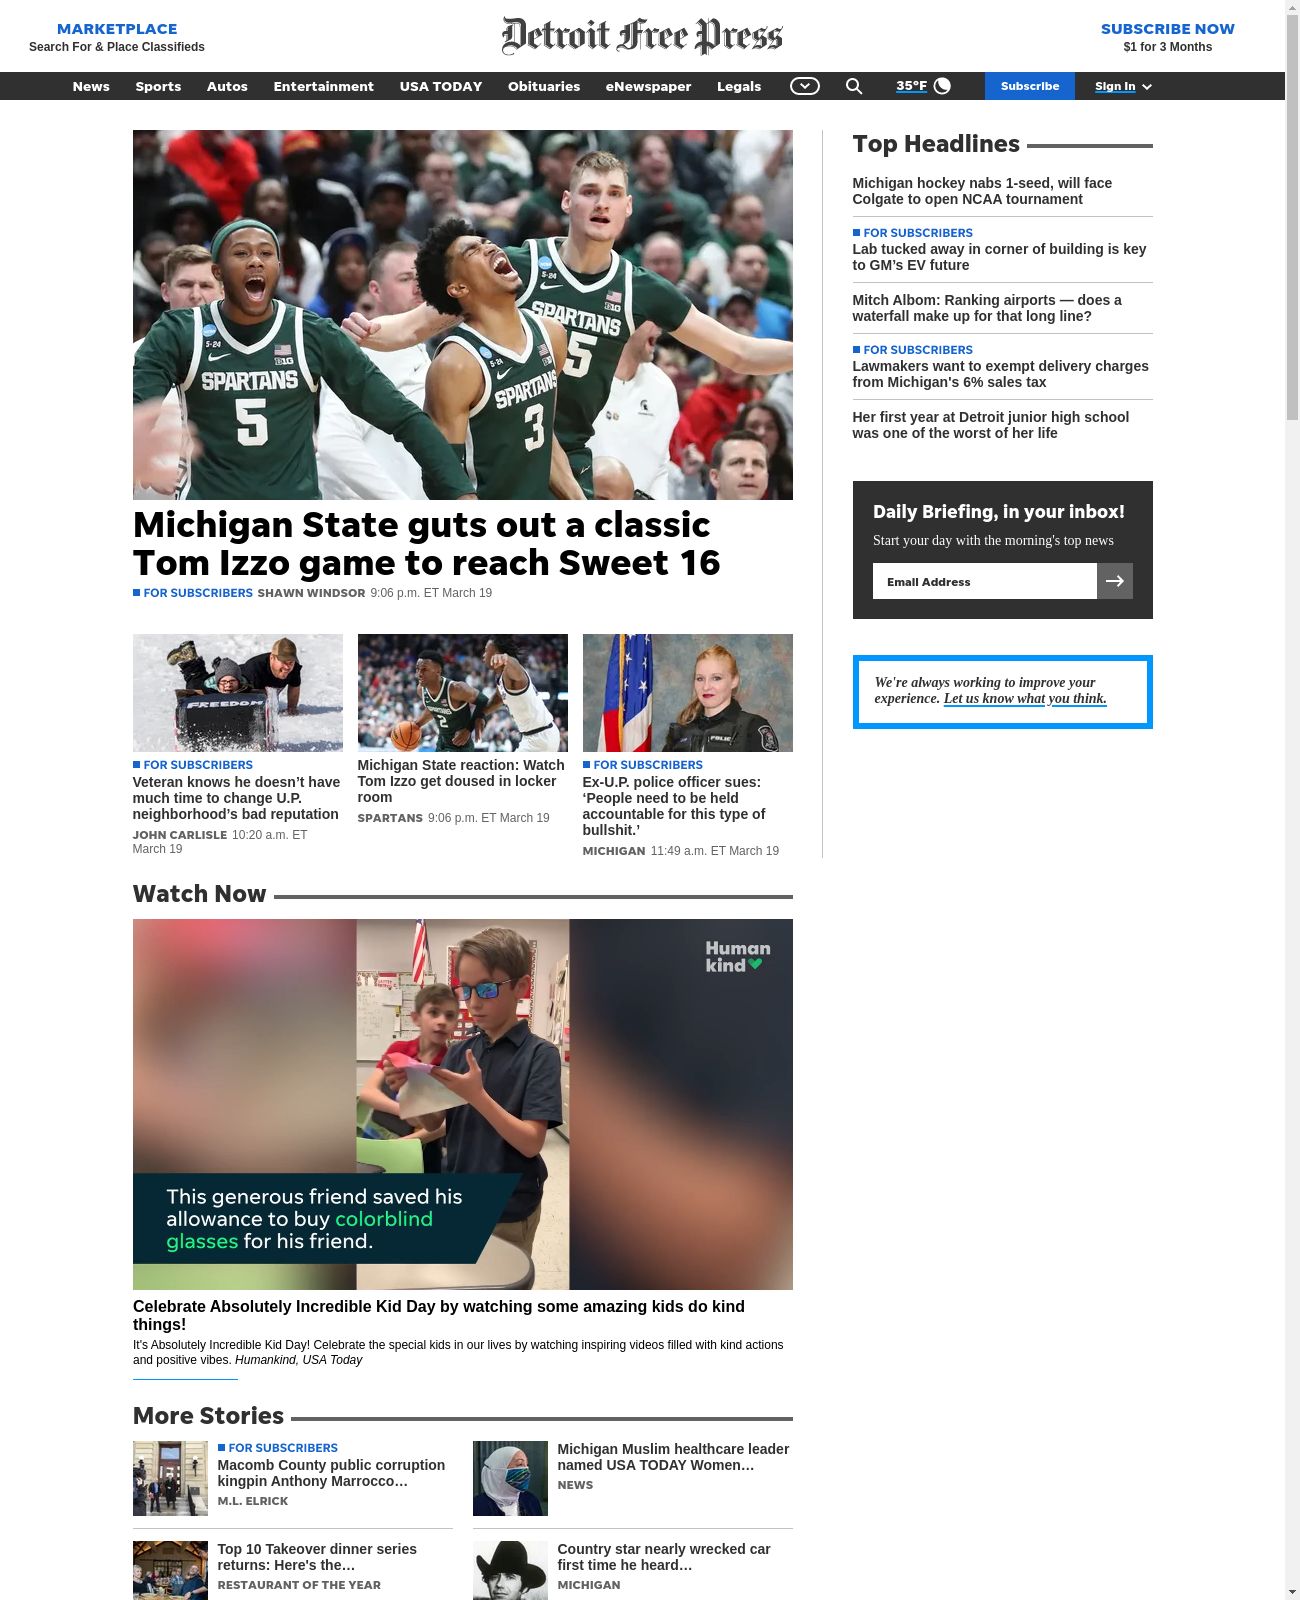 Detroit Free Press at 2023-03-19 21:55:03-04:00 local time